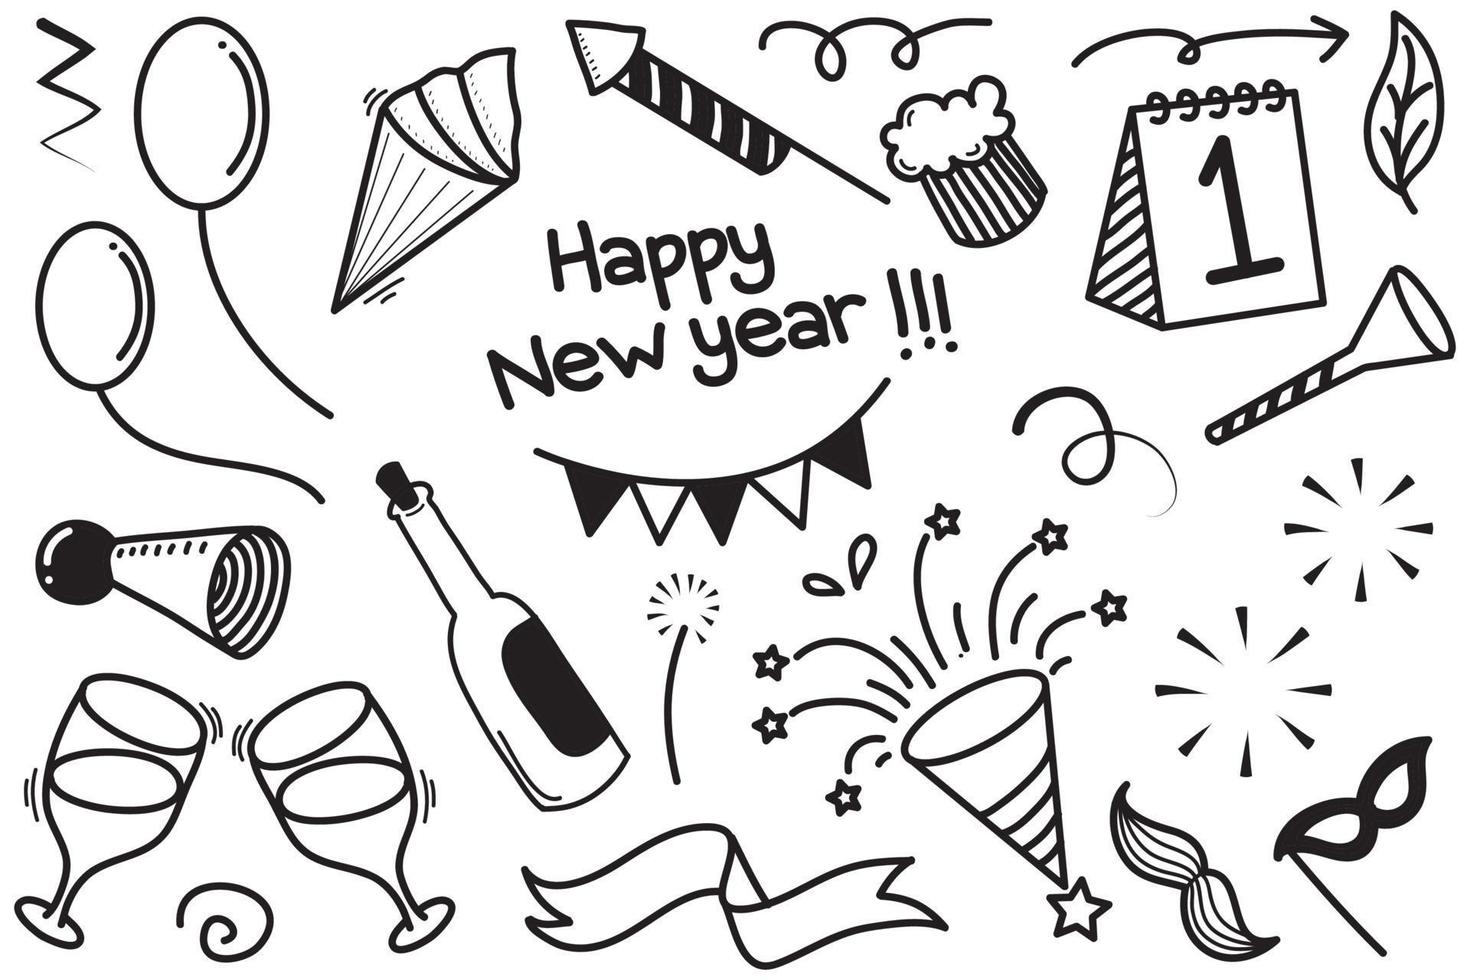 New year party doodle elements in black isolated over white background. vector illustration